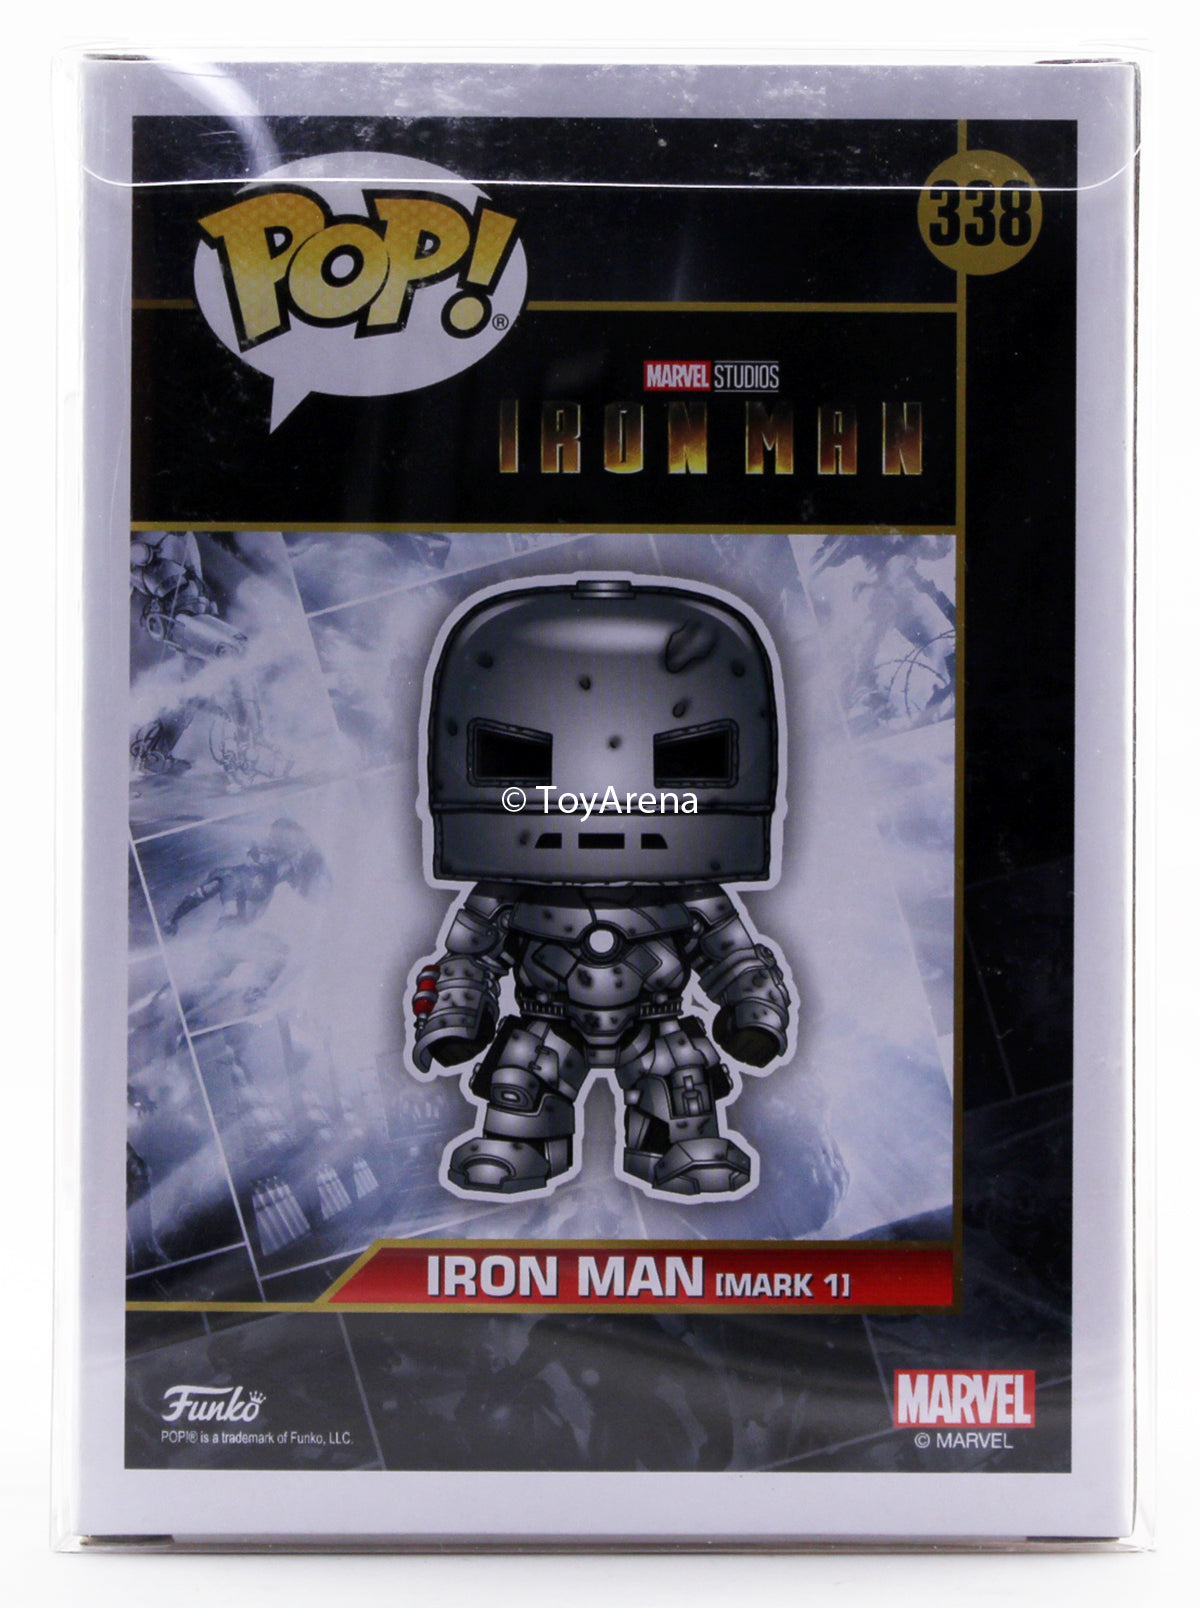 Funko Pop Iron Man Mark 1 10th Anniversary SDCC 2018 Exclusive with Sleve Case